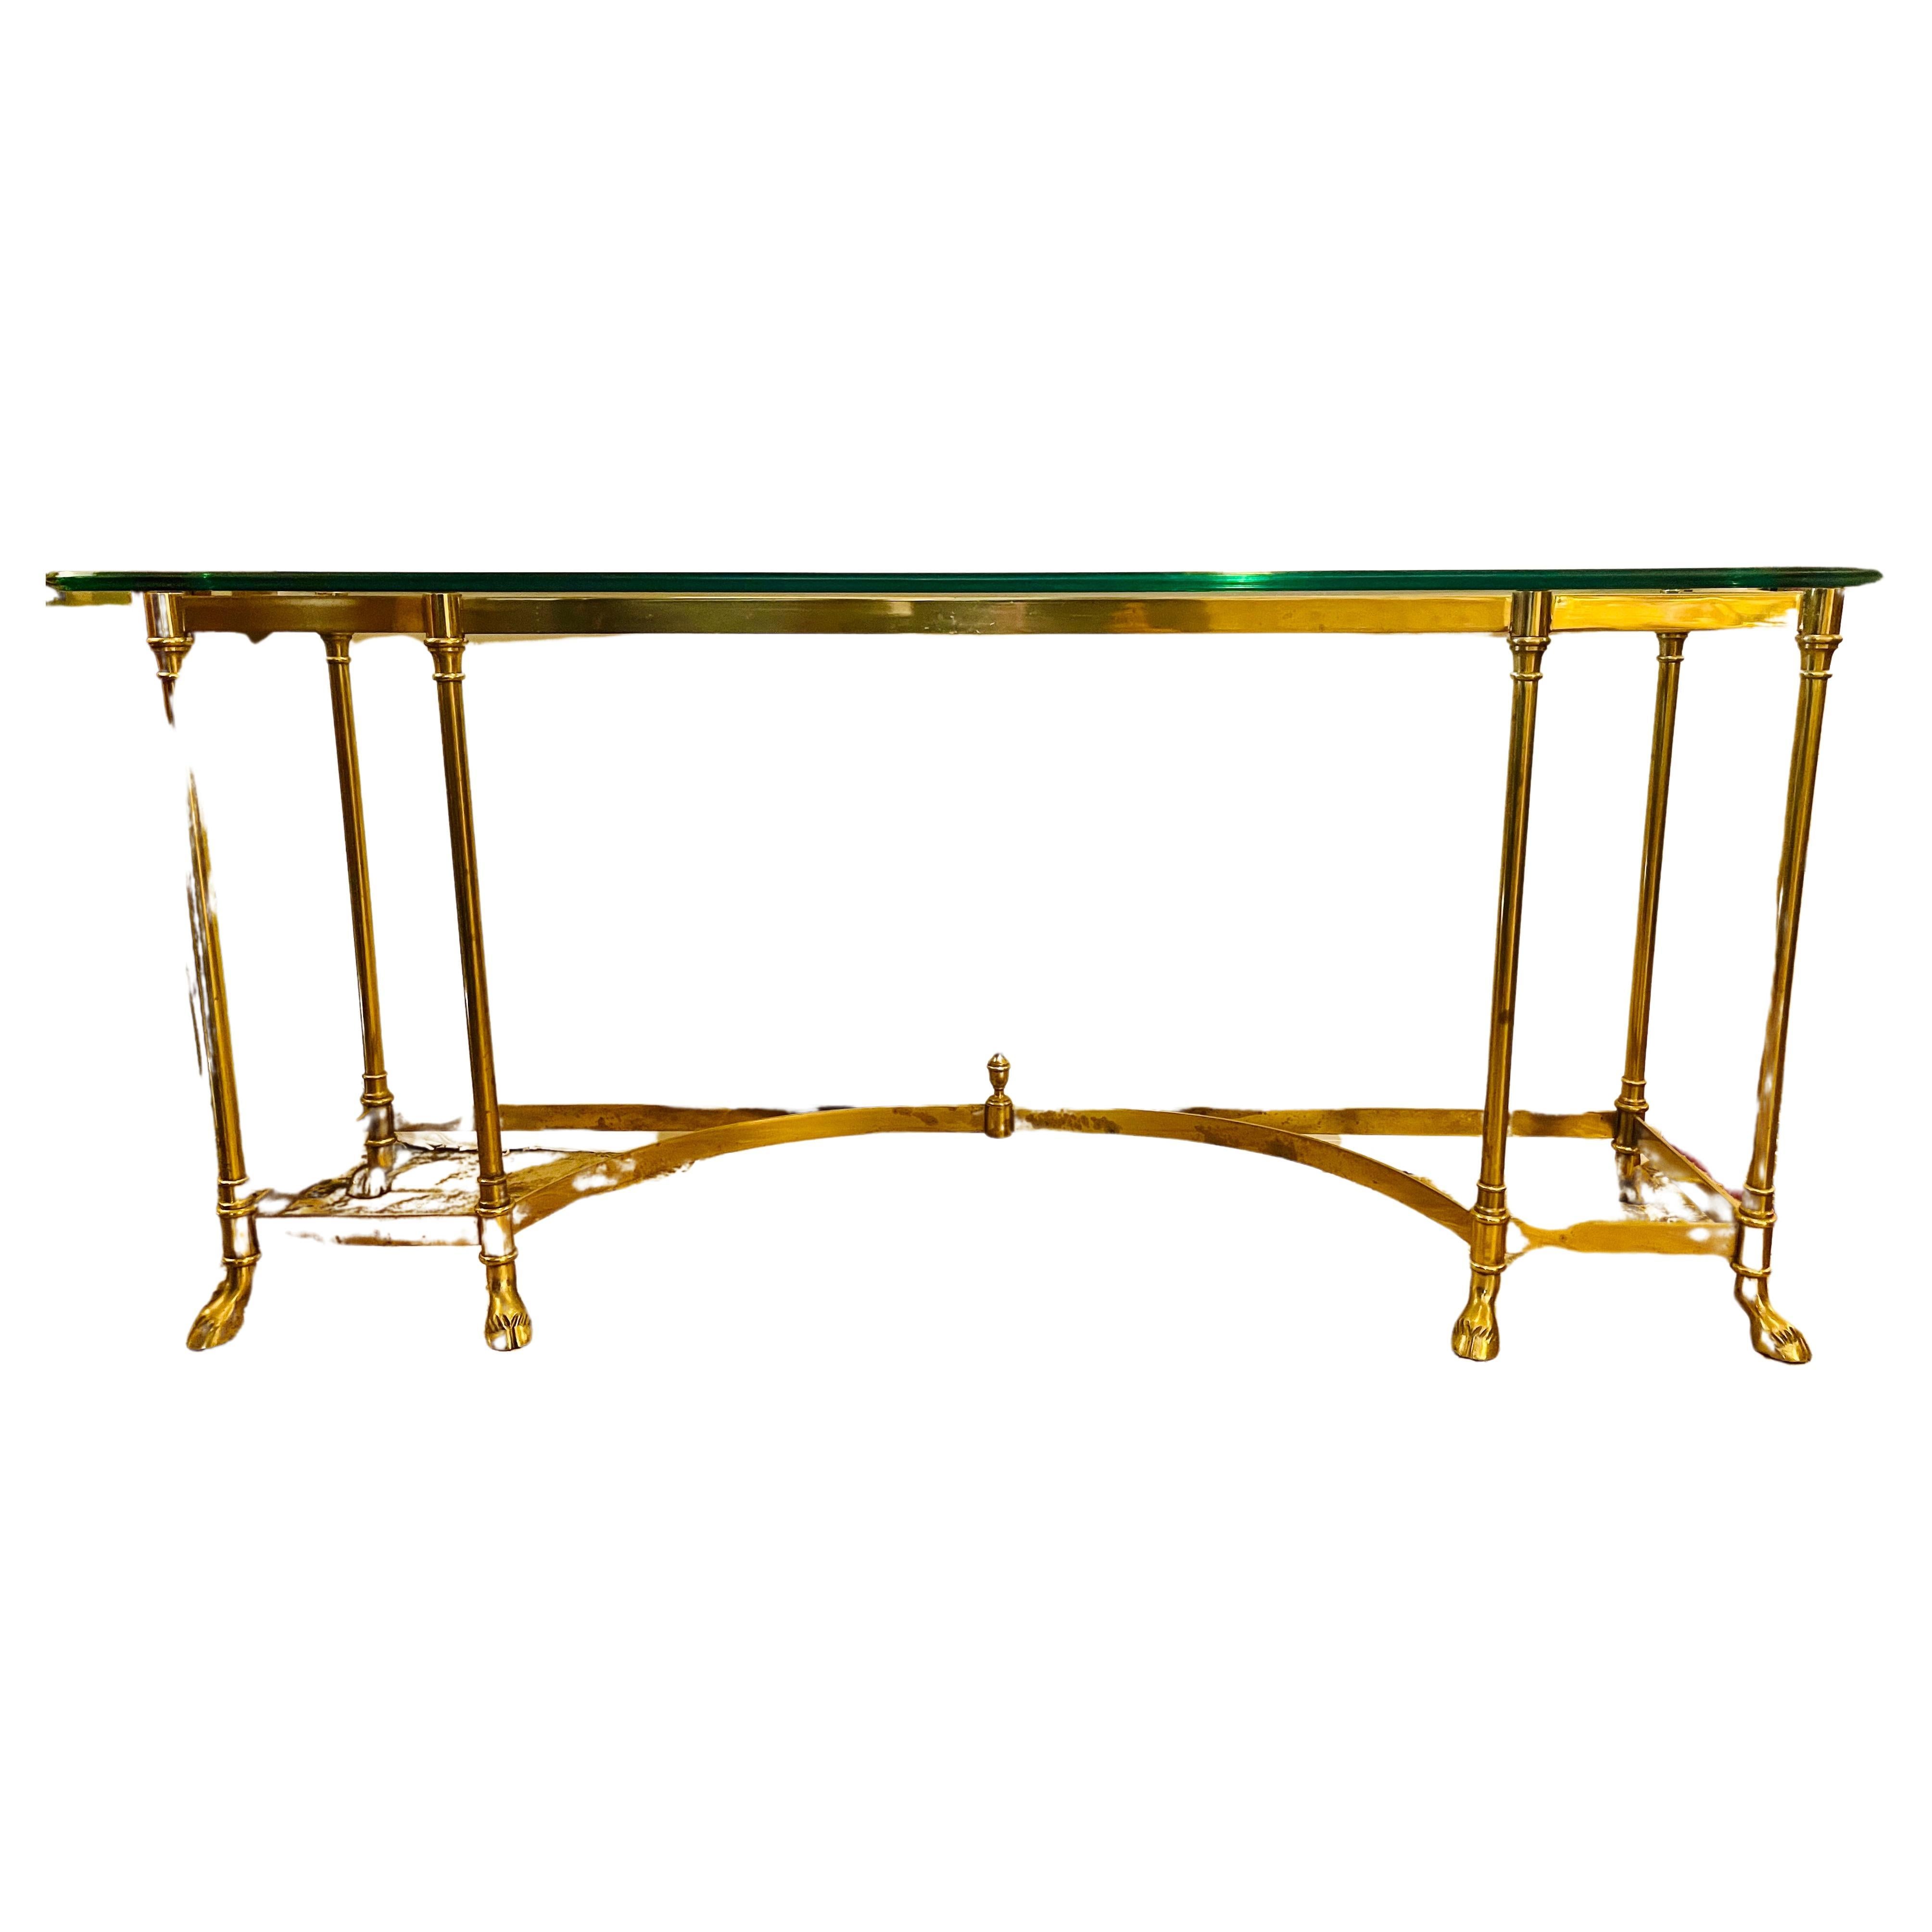 Vintage Mid Century solid brass Maison Jansen glass top console table.
This is from the 1970's and note the brass is solid and features the highly coveted hoof feet. The piece is iconic and would benefit from a quick brass polish as it has some spot